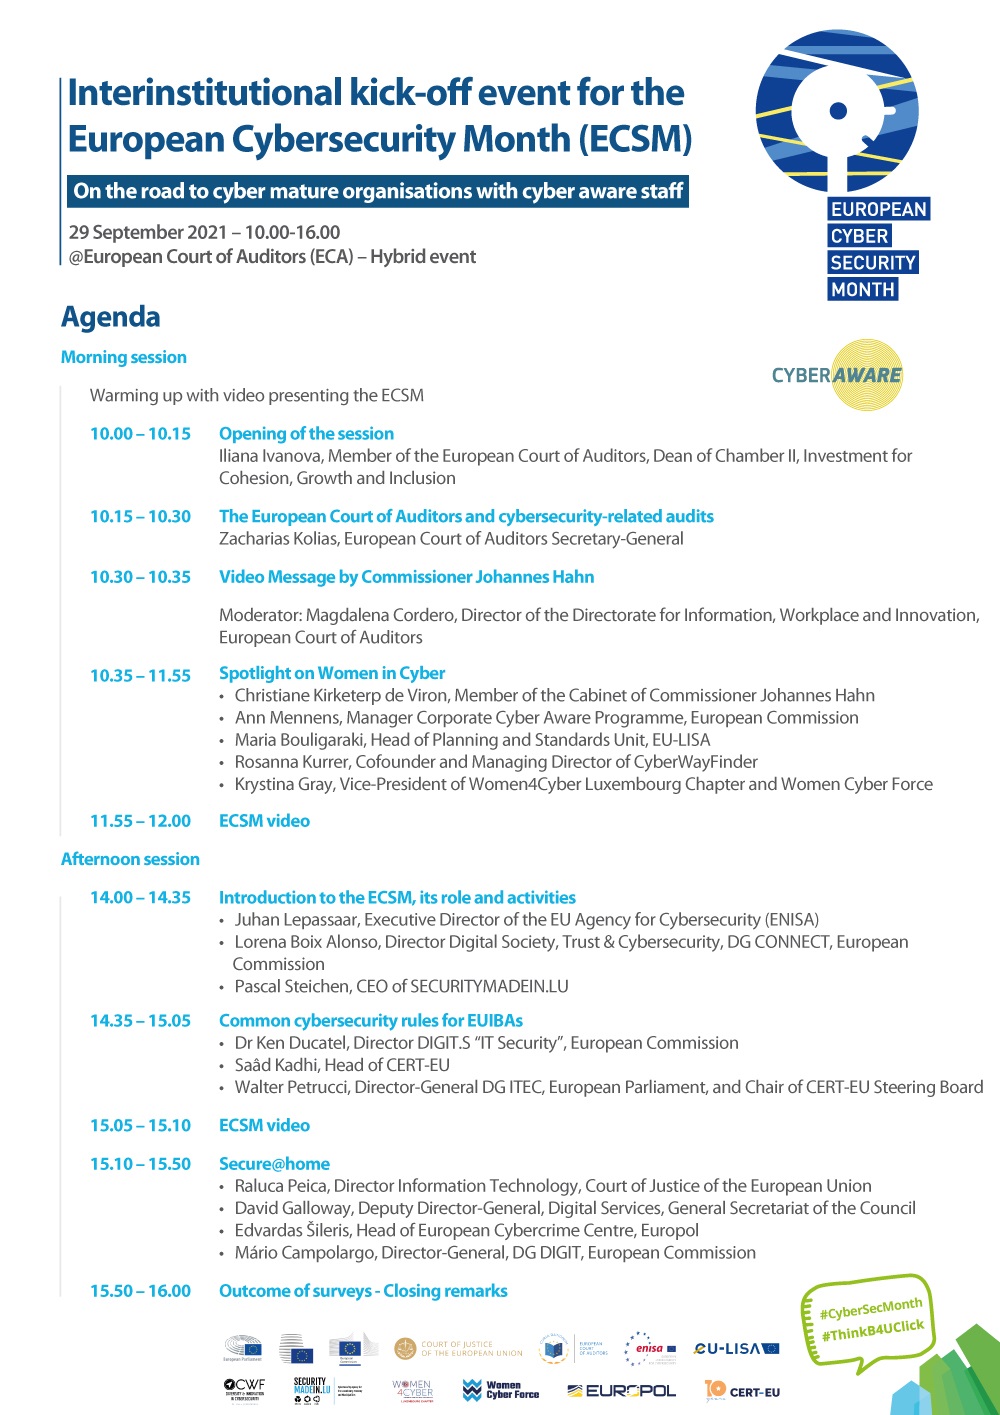 Interinstitutional kick-off event for European Cyber Security Month agenda